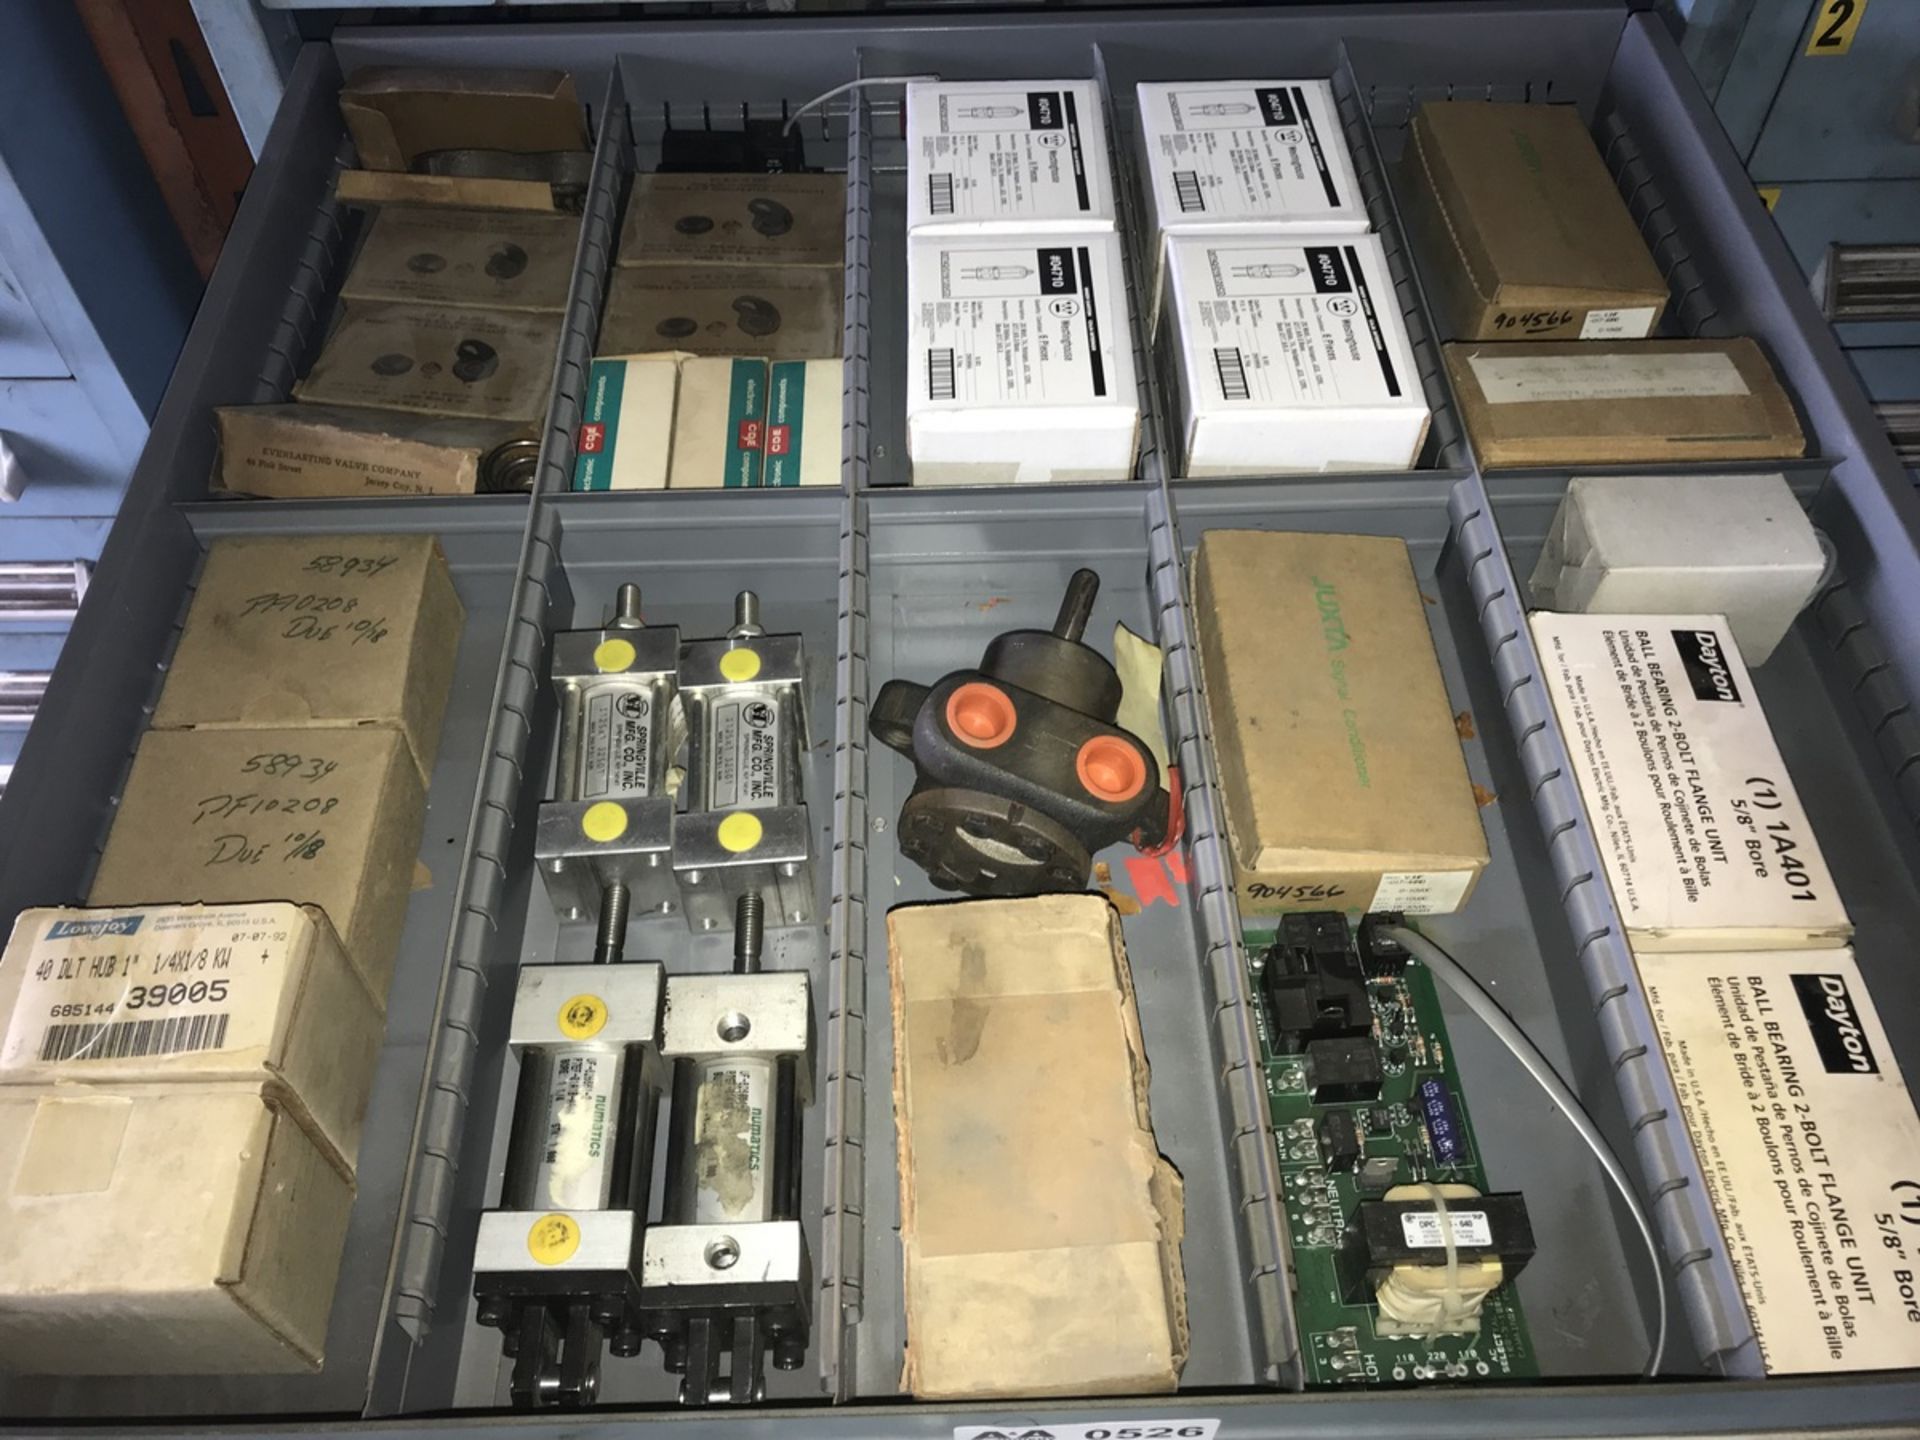 Contents of Drawer including Dayton bearings, pneumatic cylinders, lovejoy couplings, everlasting